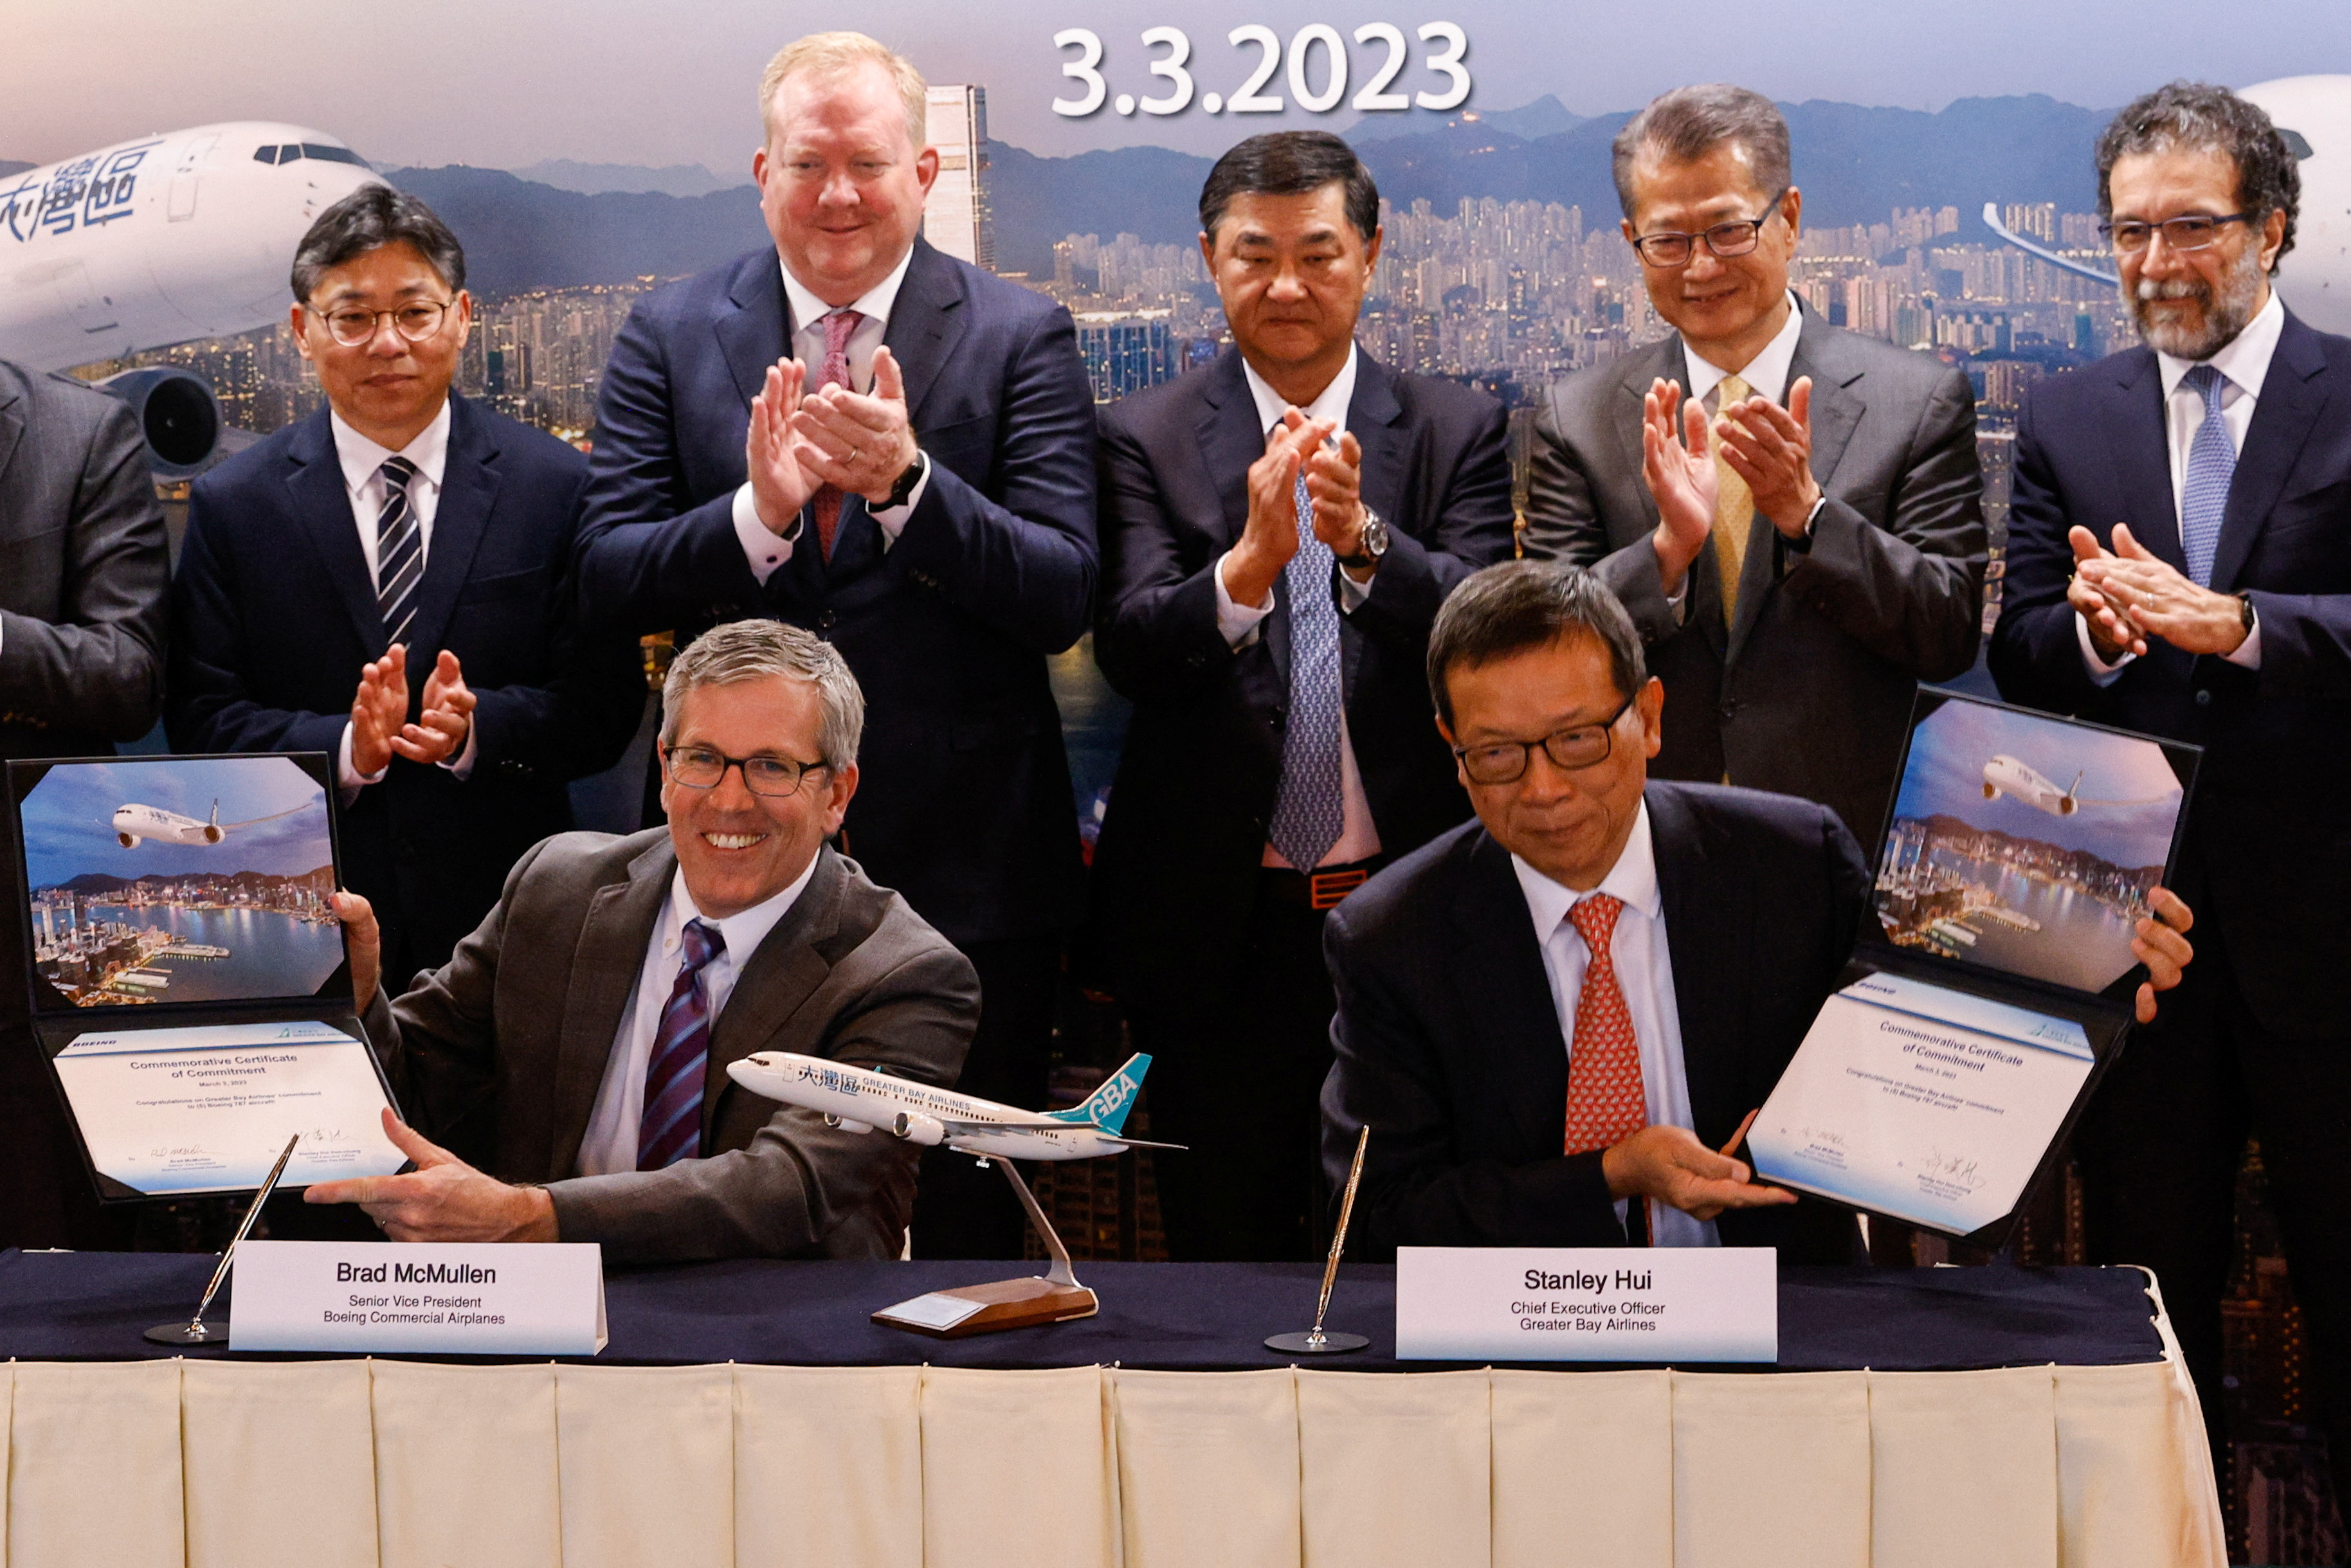 Boeing and Greater Bay Airlines' agreement signing ceremony in Hong Kong